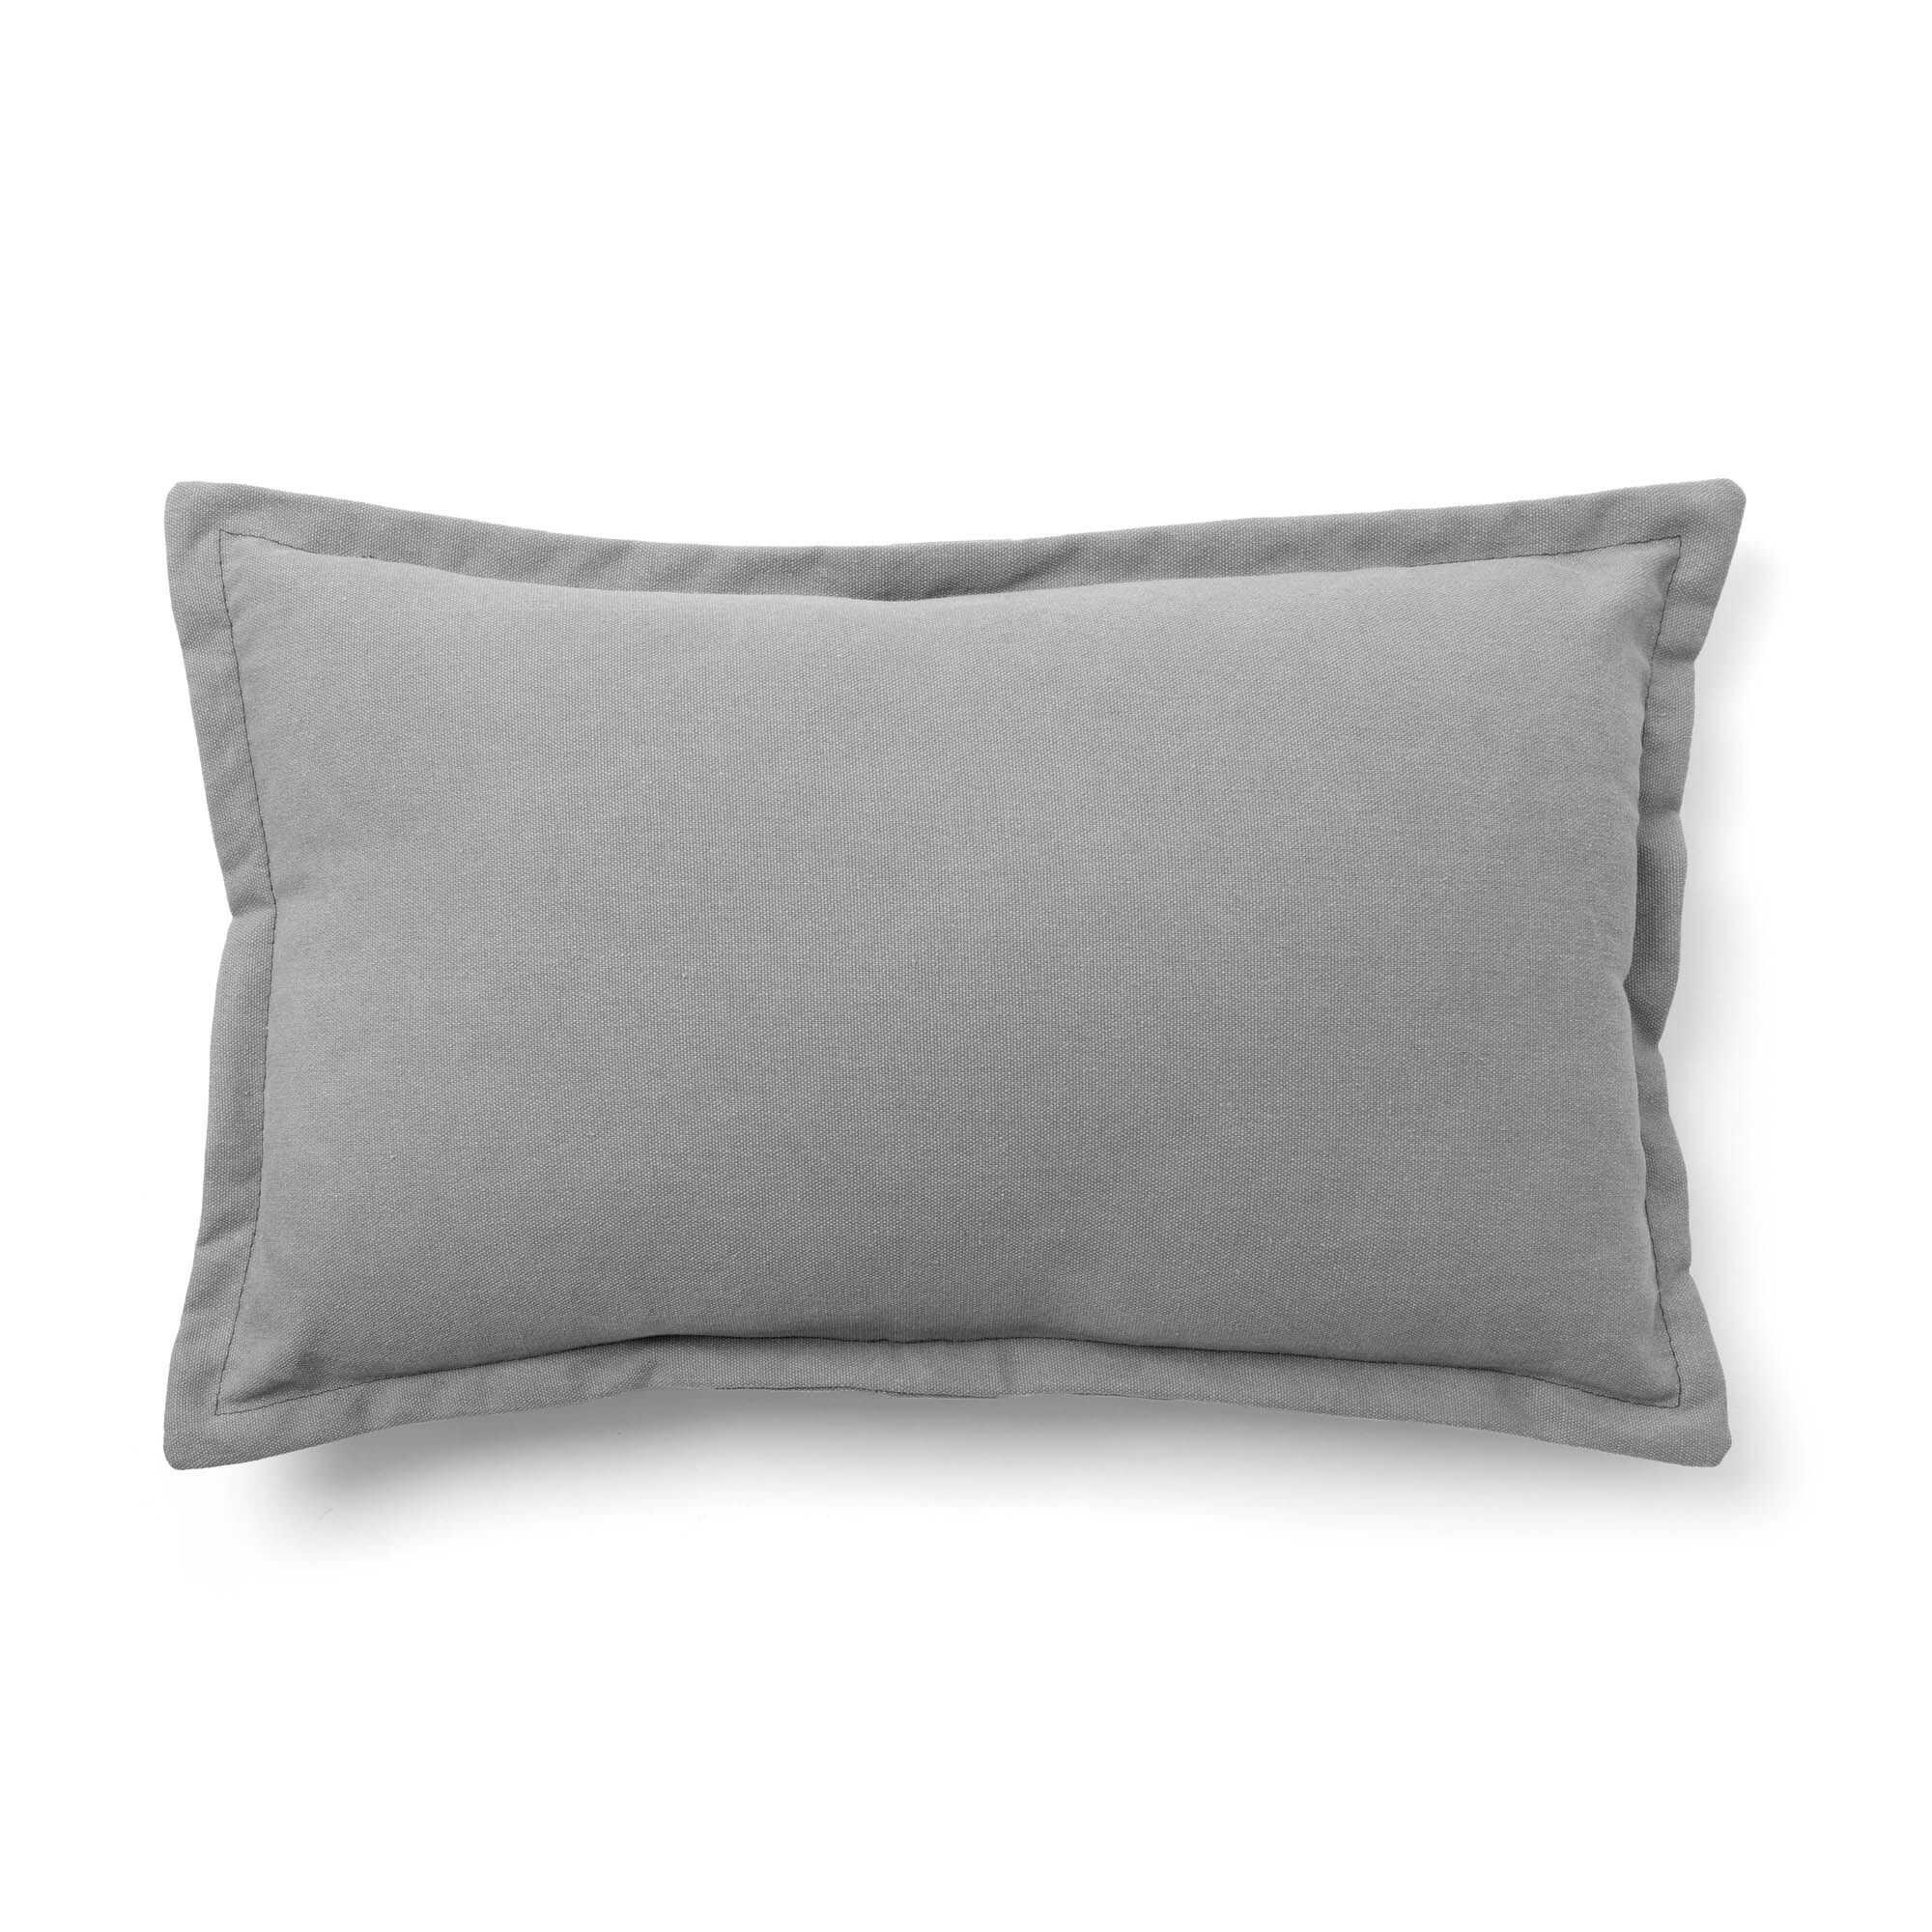 Kave Home Lisette cushion cover 30 x 50 cm in grey